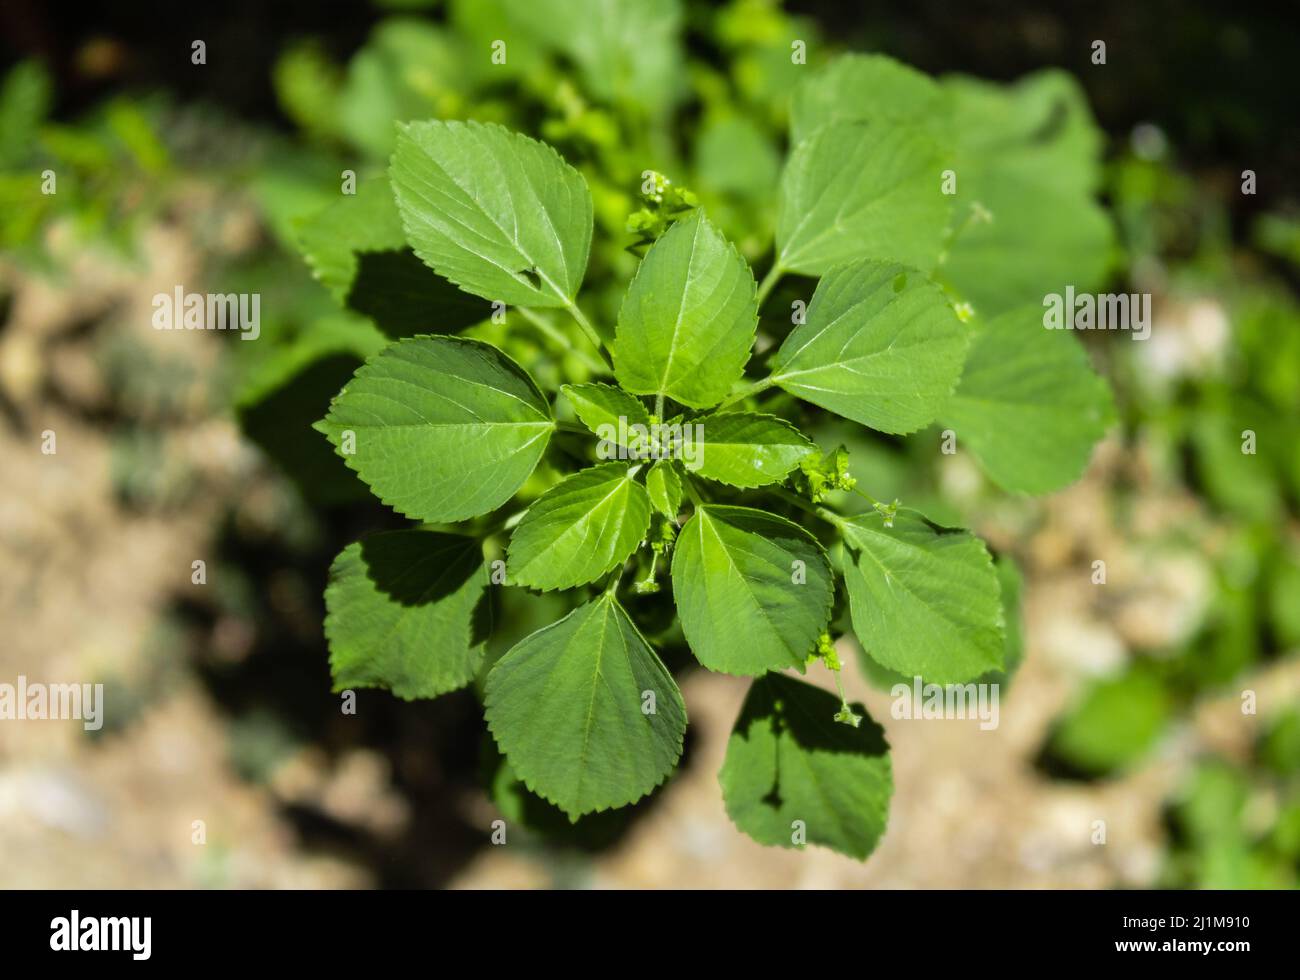 Close-up shot of Acalypha indica leaves Stock Photo